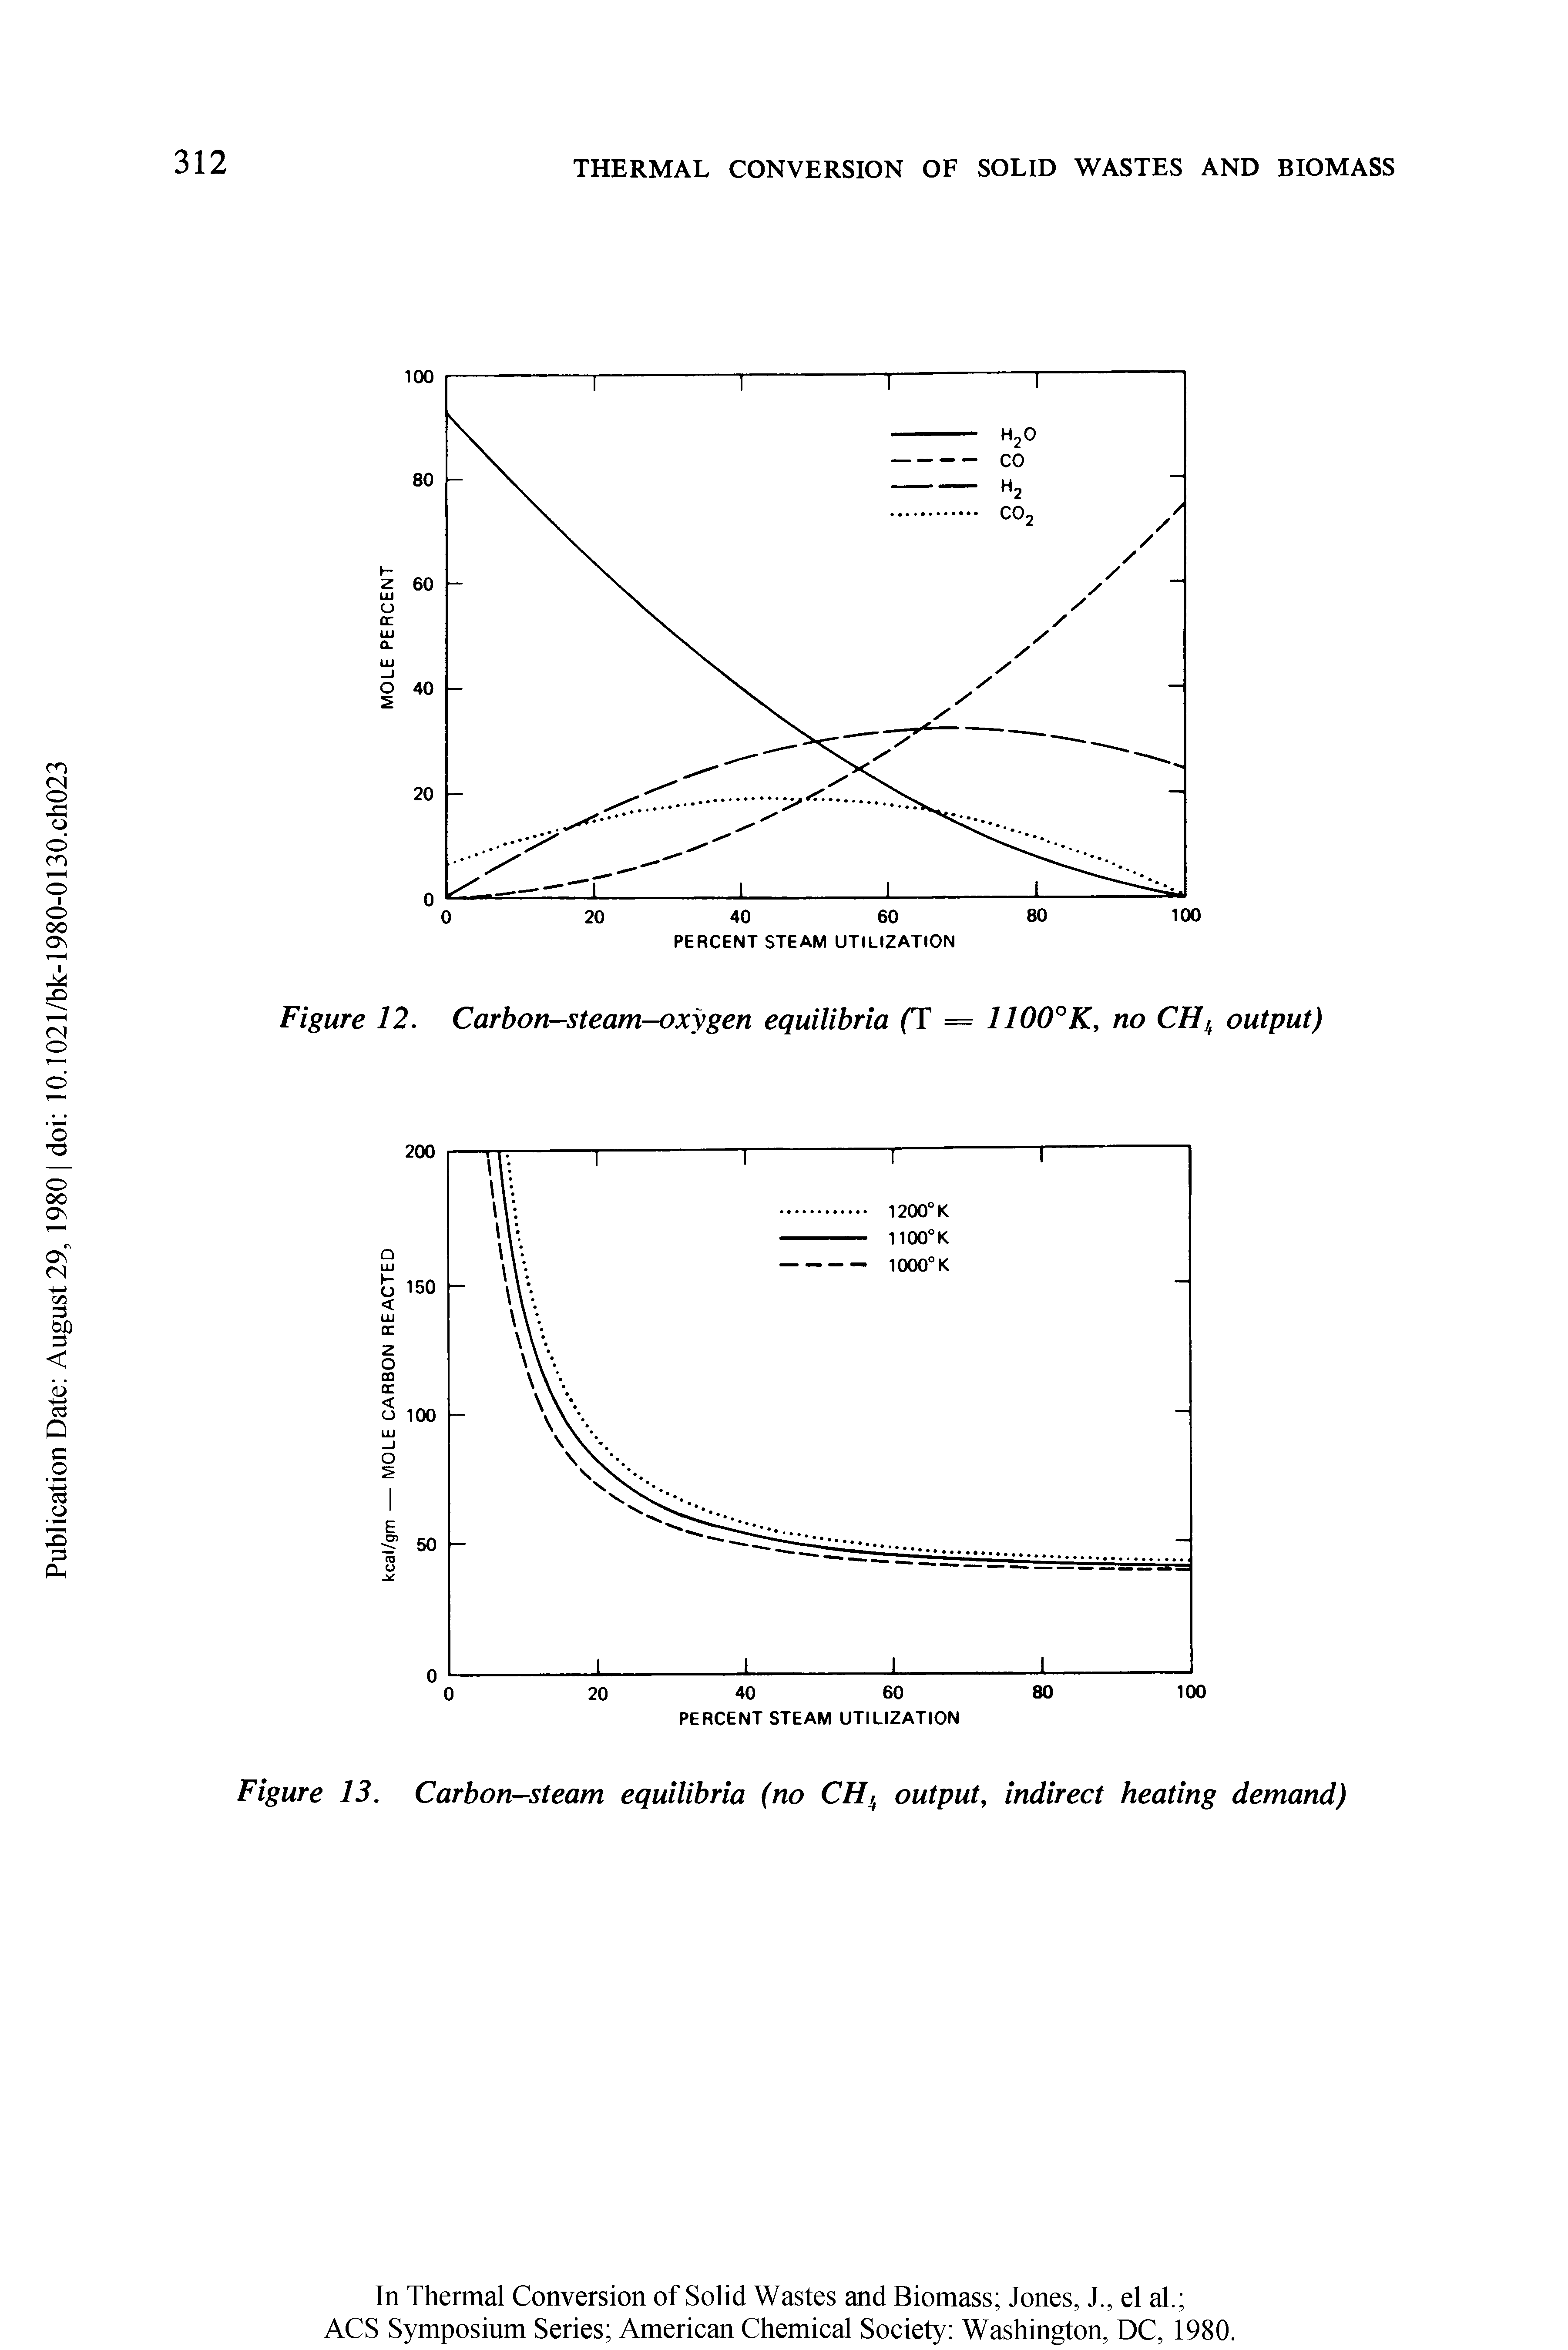 Figure 13. Carbon-steam equilibria (no CH,t output, indirect heating demand)...